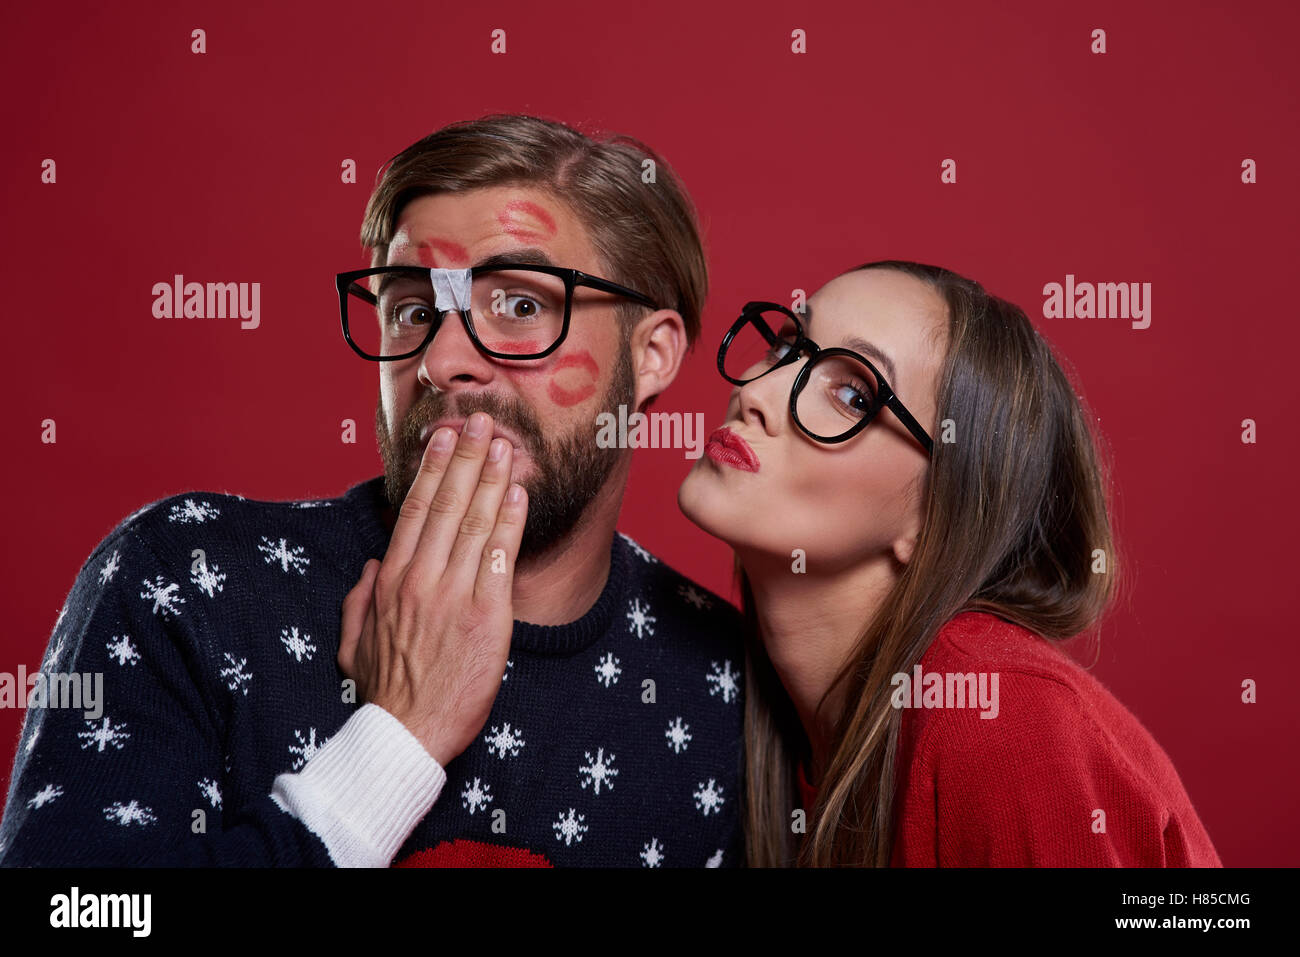 Shy man and his girlfriend Stock Photo